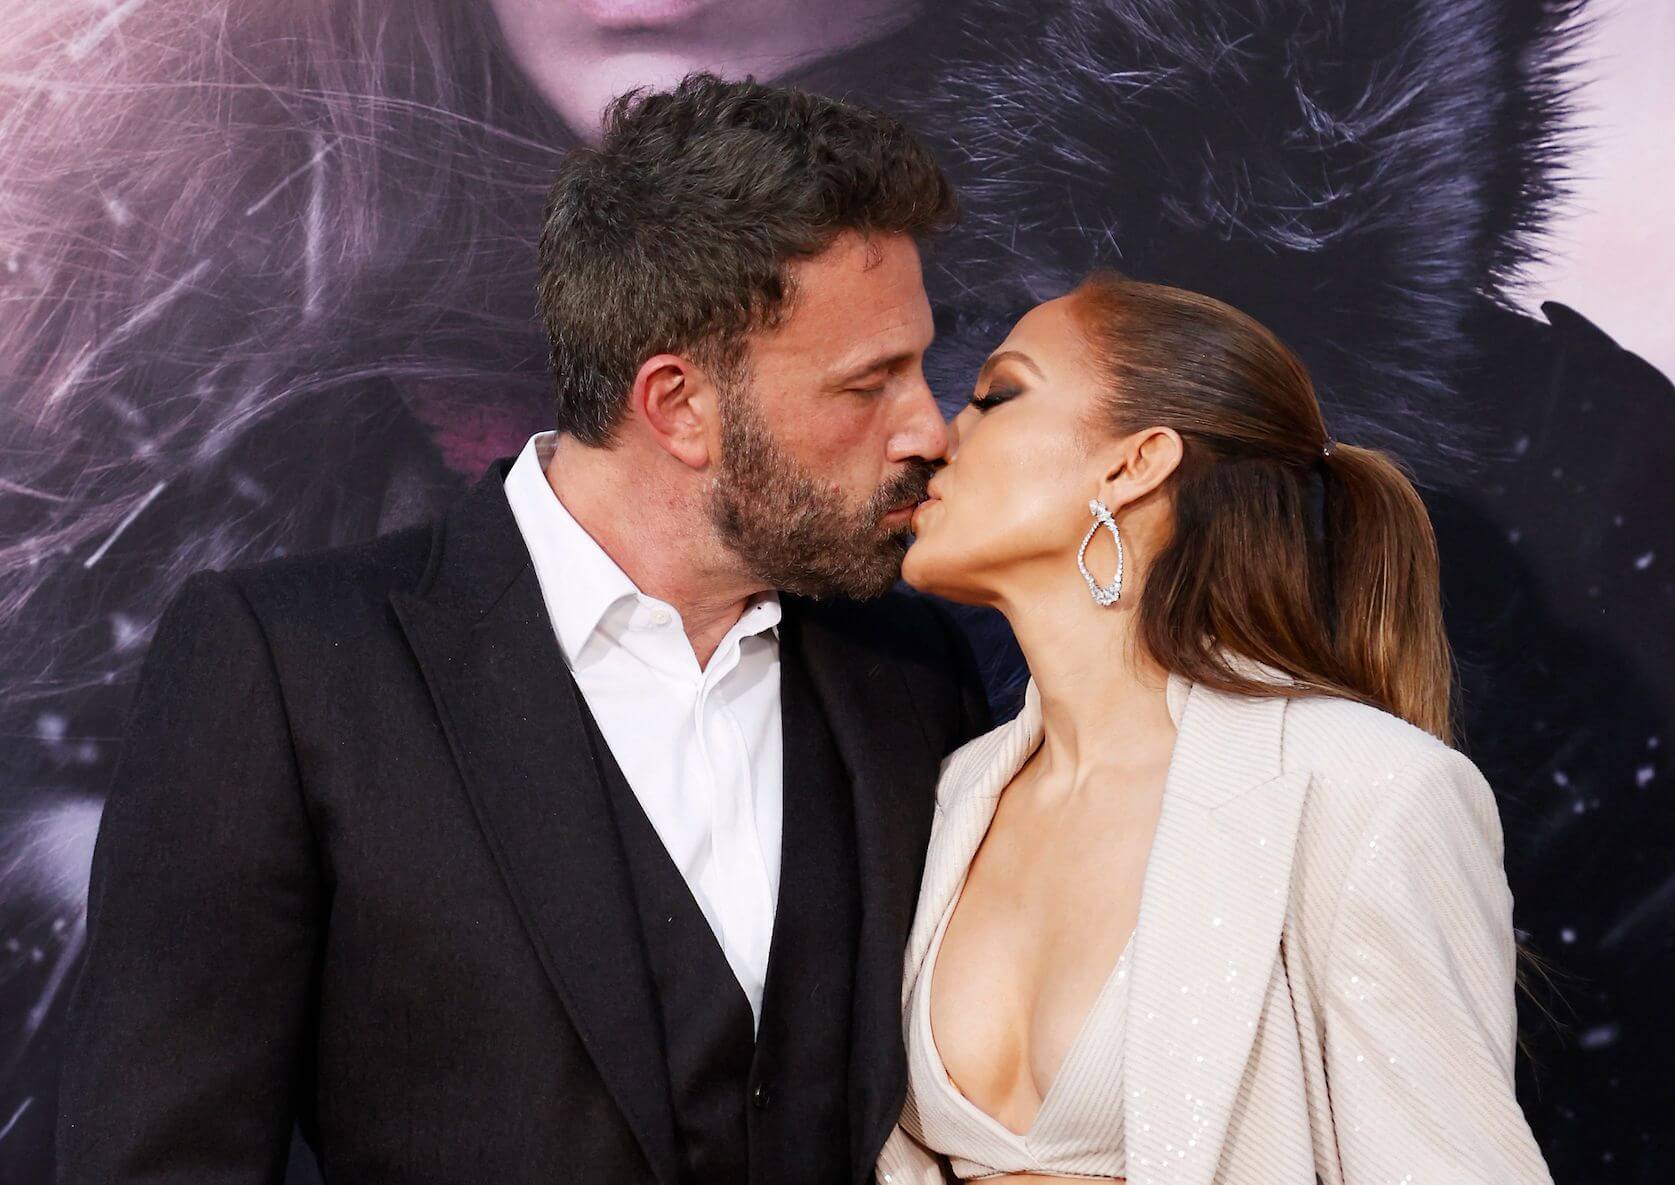 Ben Affleck and Jennifer Lopez kissing at a film premiere in May 2023